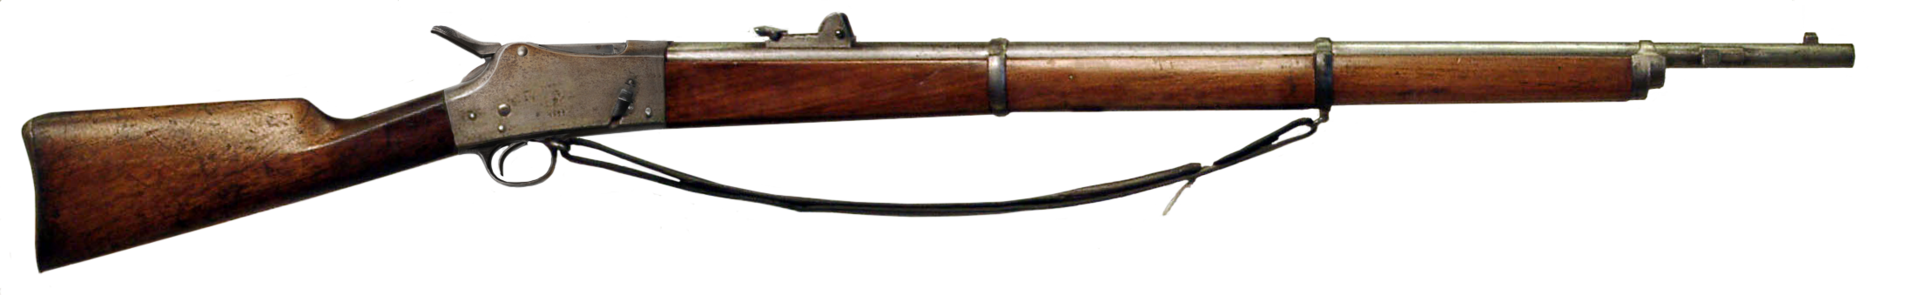 Rifle - Krag-Petersson.png